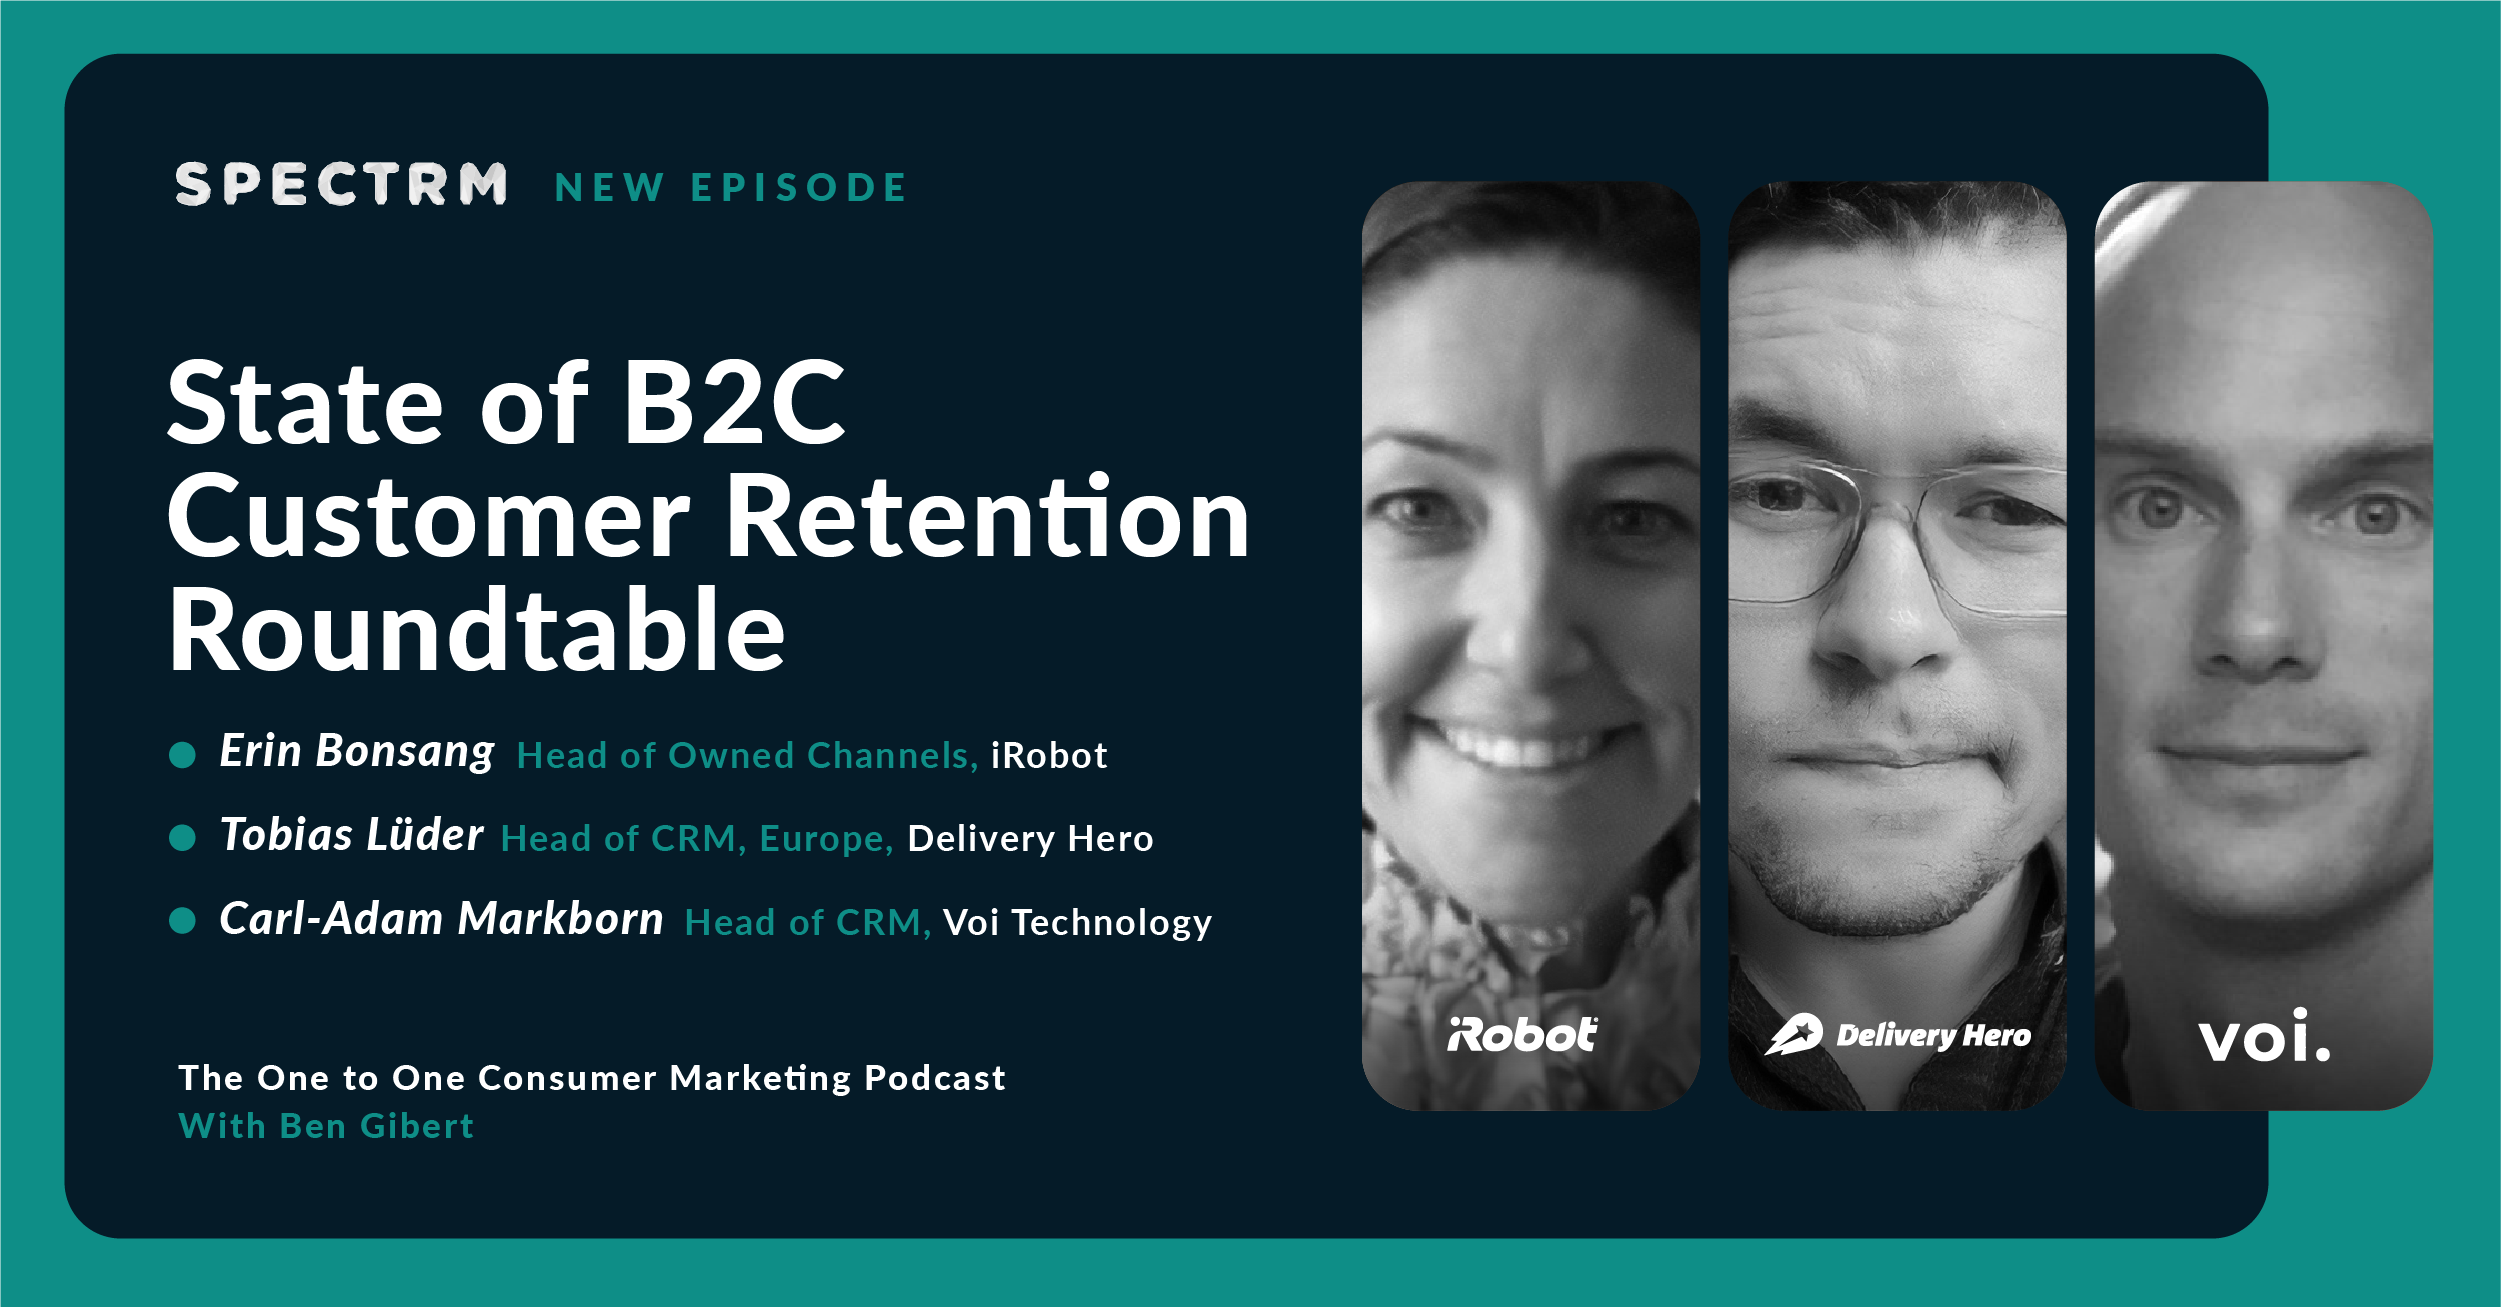 State of B2C Customer Retention Roundtable